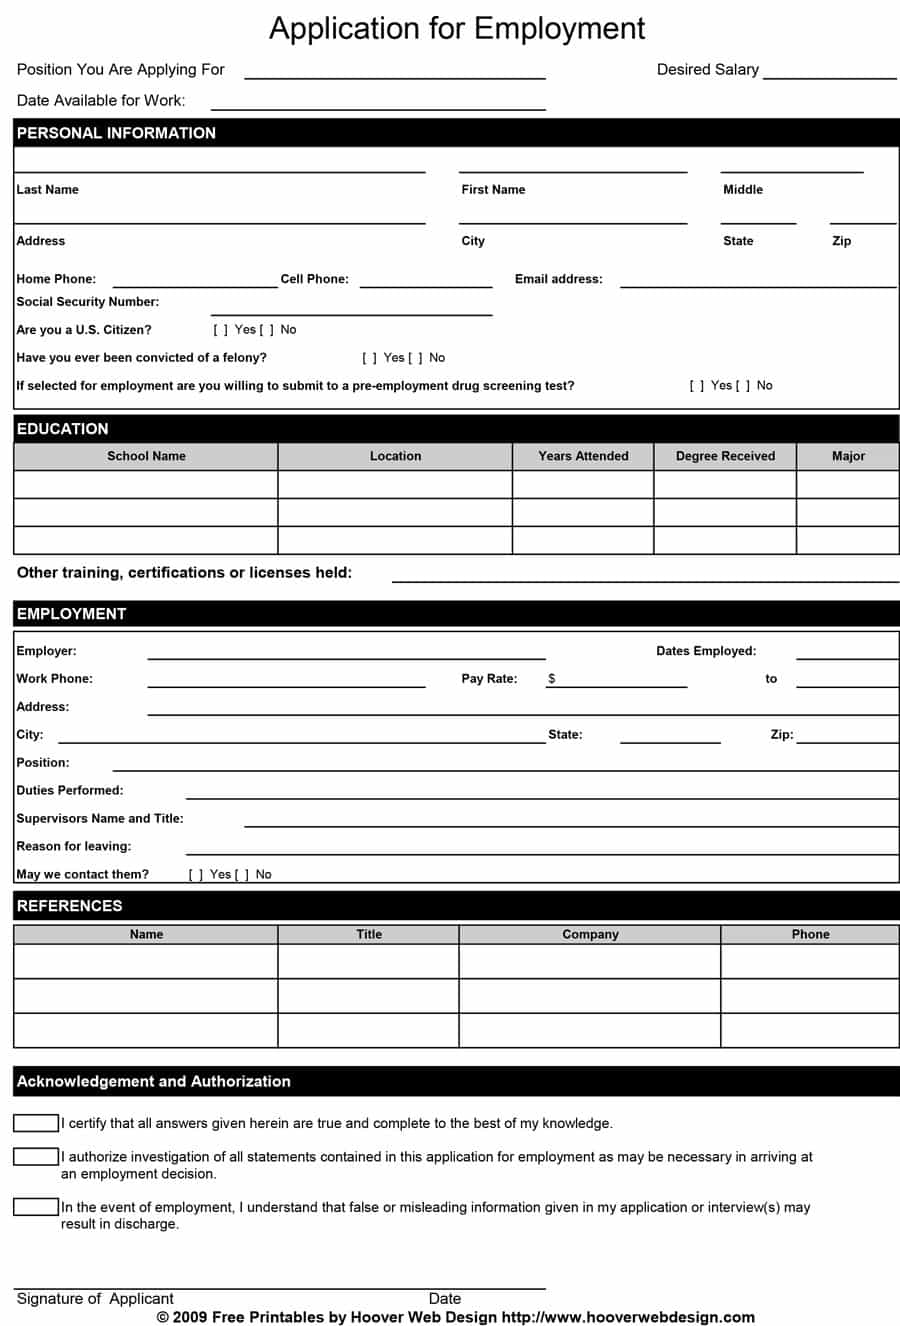 free job application forms printable   Ecza.solinf.co